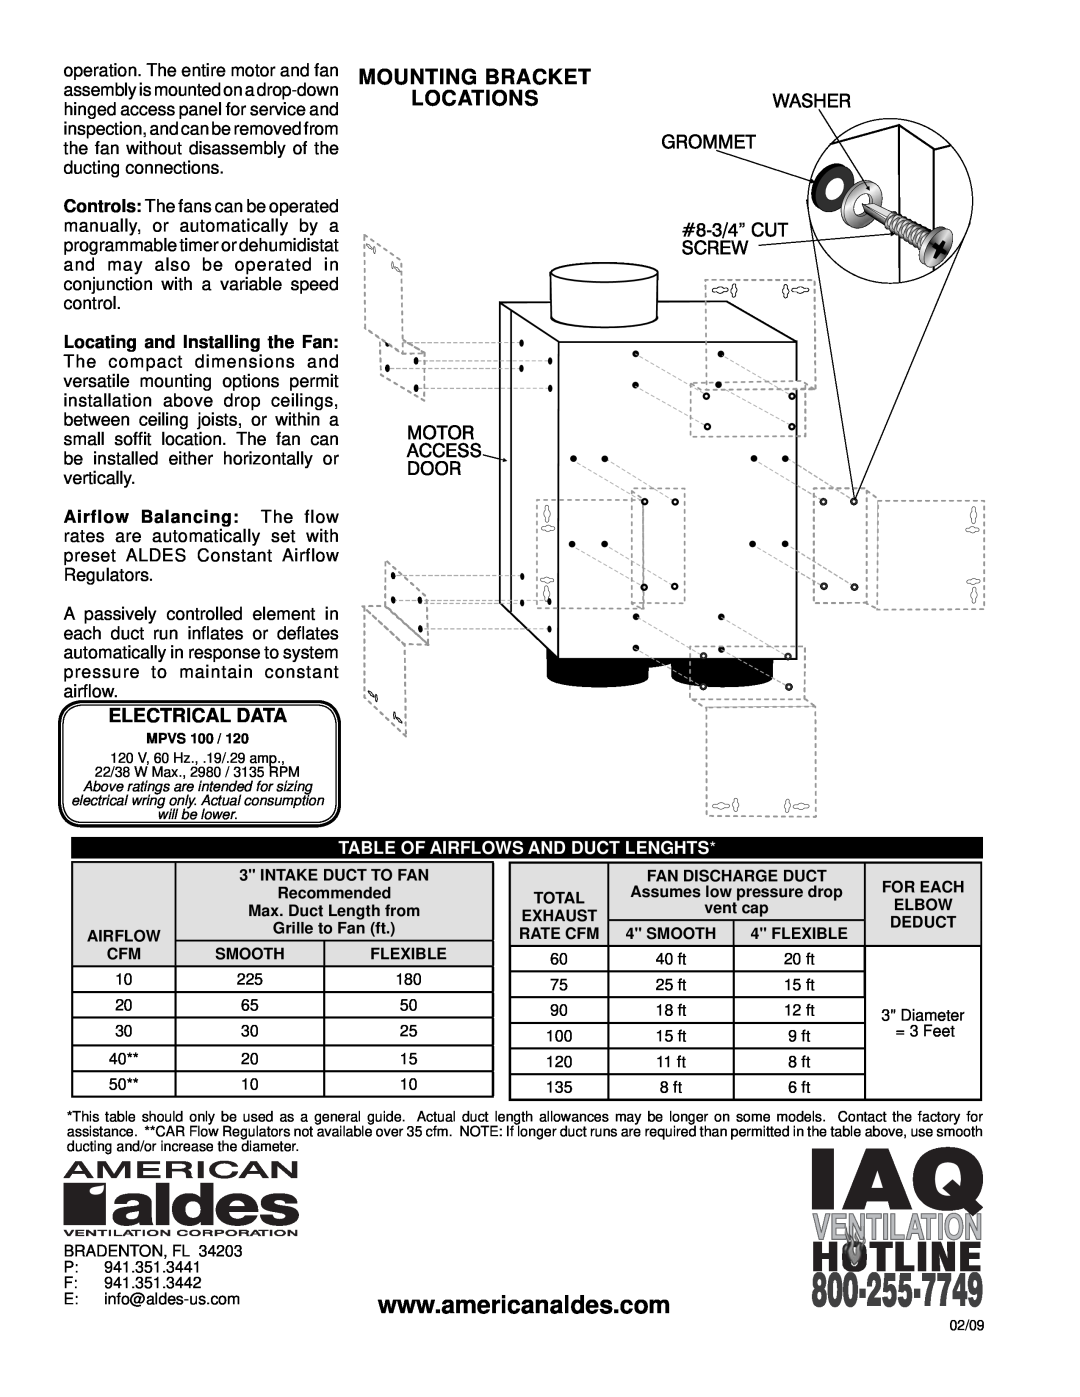 American Aldes RDF 8-8IP Mounting Bracket Locations, Electrical Data, Table Of Airflows And Duct Lenghts 